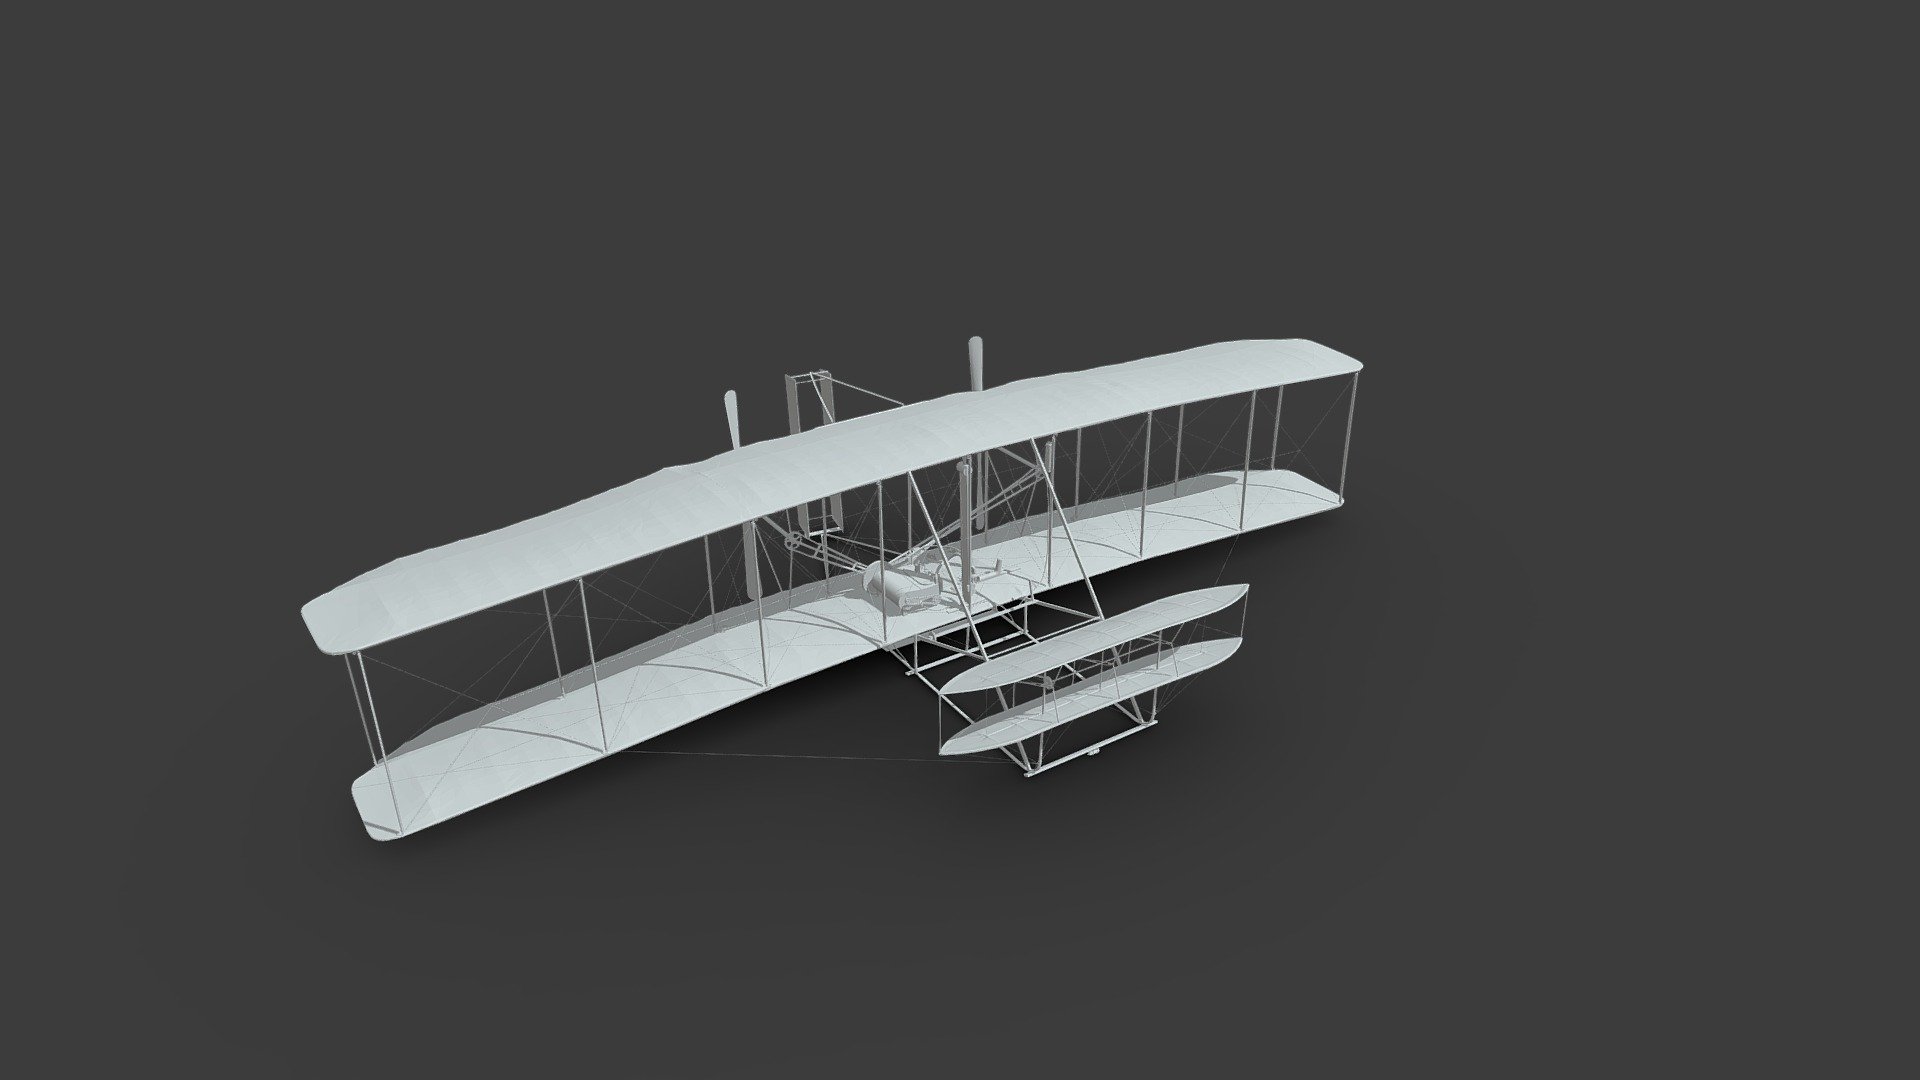 1903-wright-flyer-download-free-3d-model-by-the-smithsonian